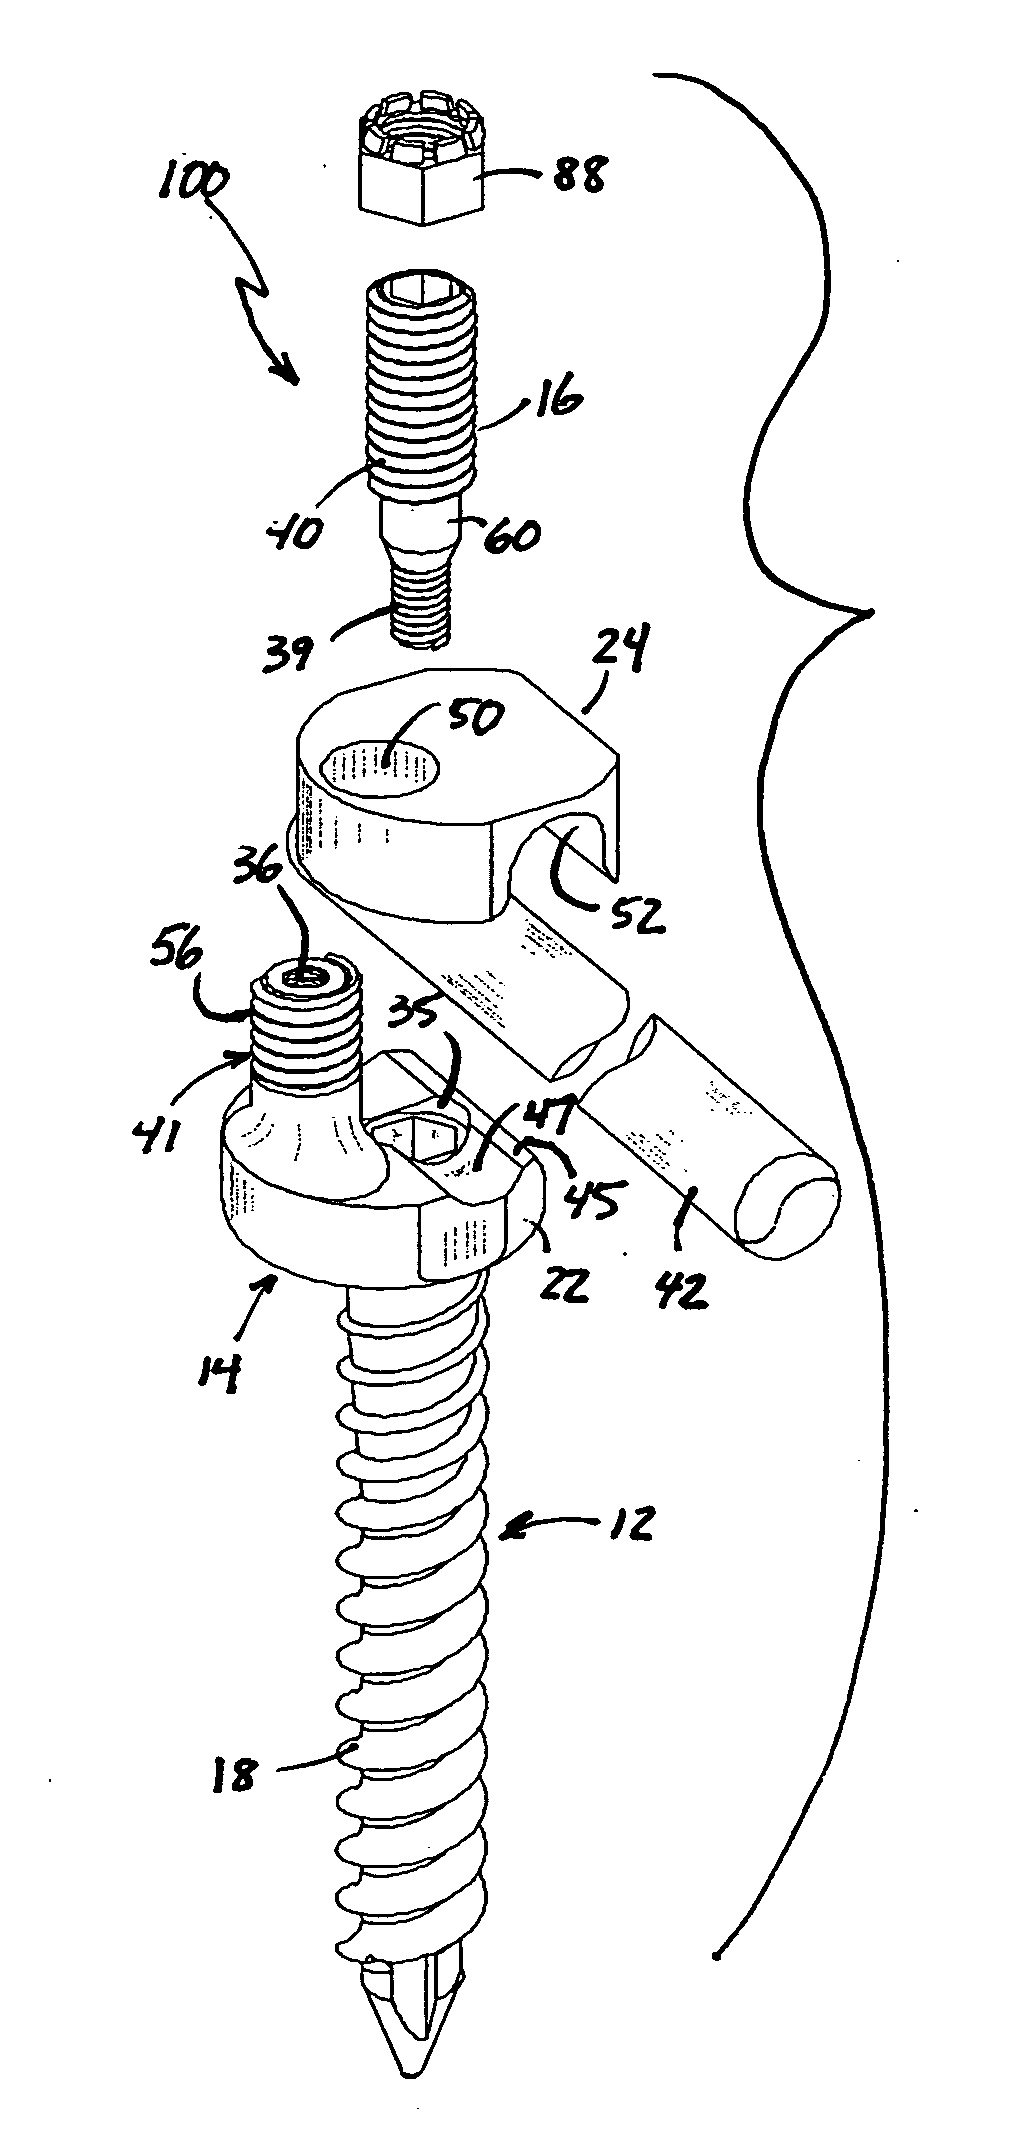 Rod and plate system for incremental reduction of the spine